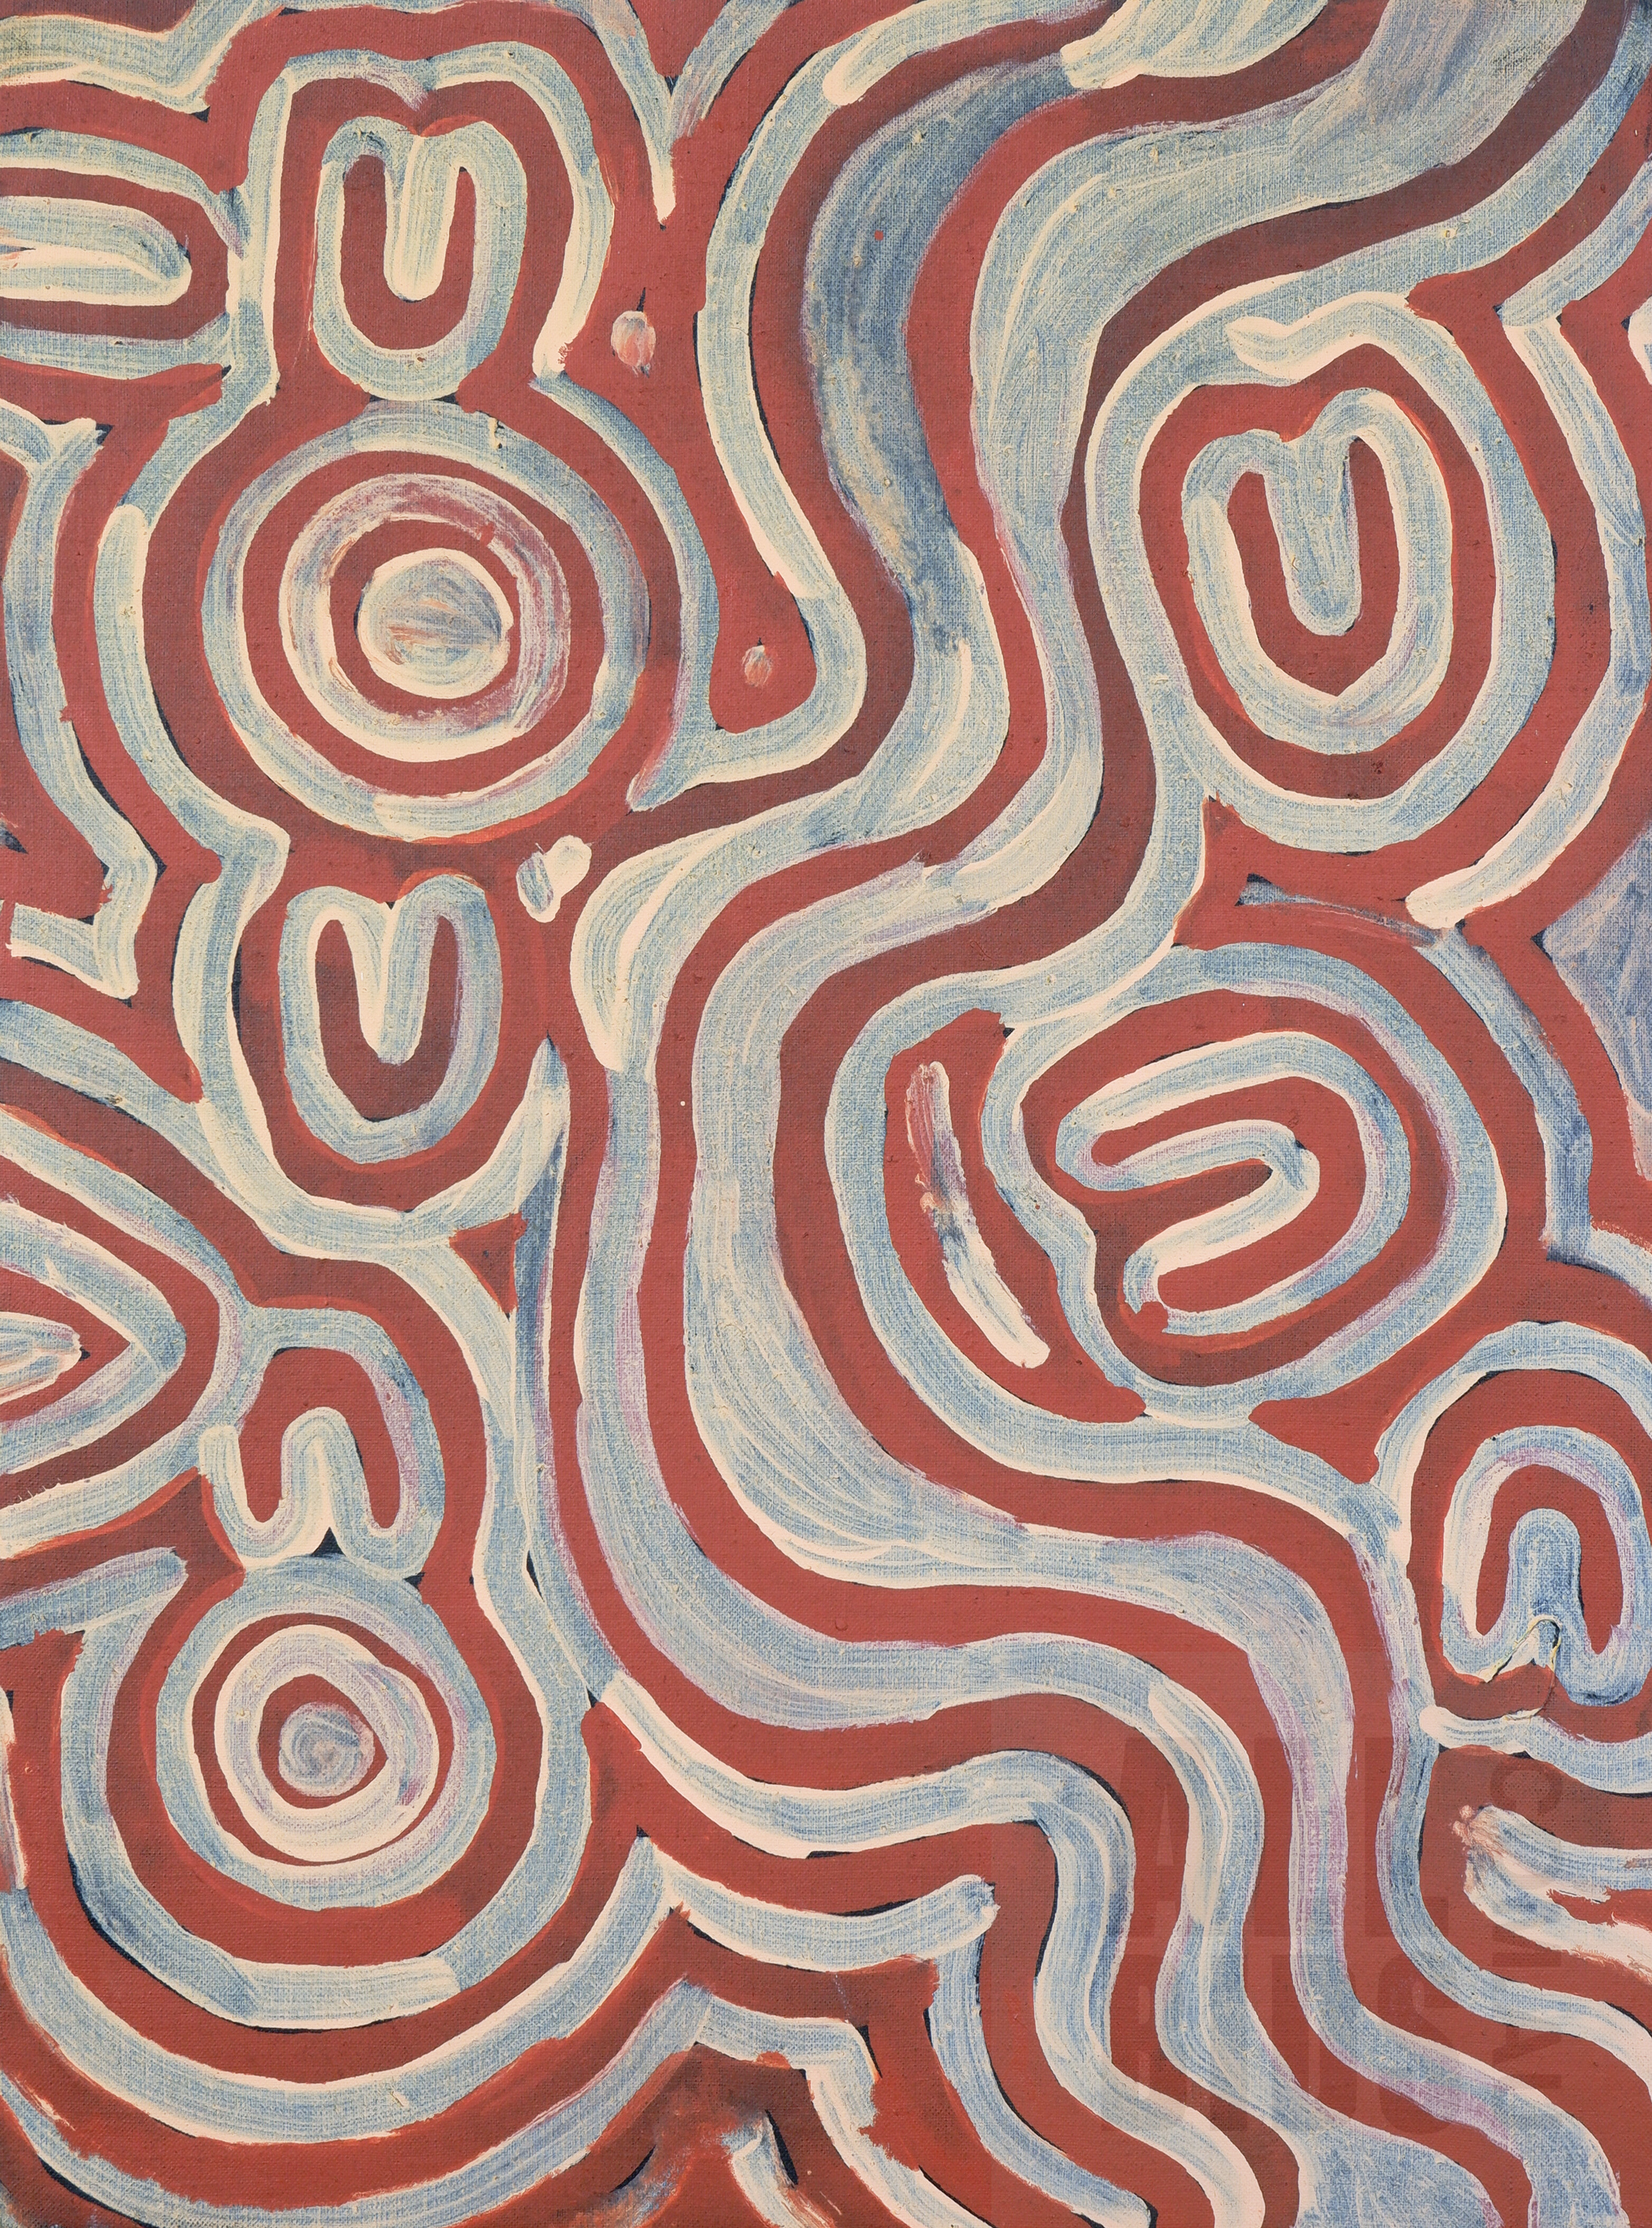 'Norma Kelly (20th Century, Aboriginal), Untitled (Our Country), Acrylic on Linen, 60 x 45.5 cm'